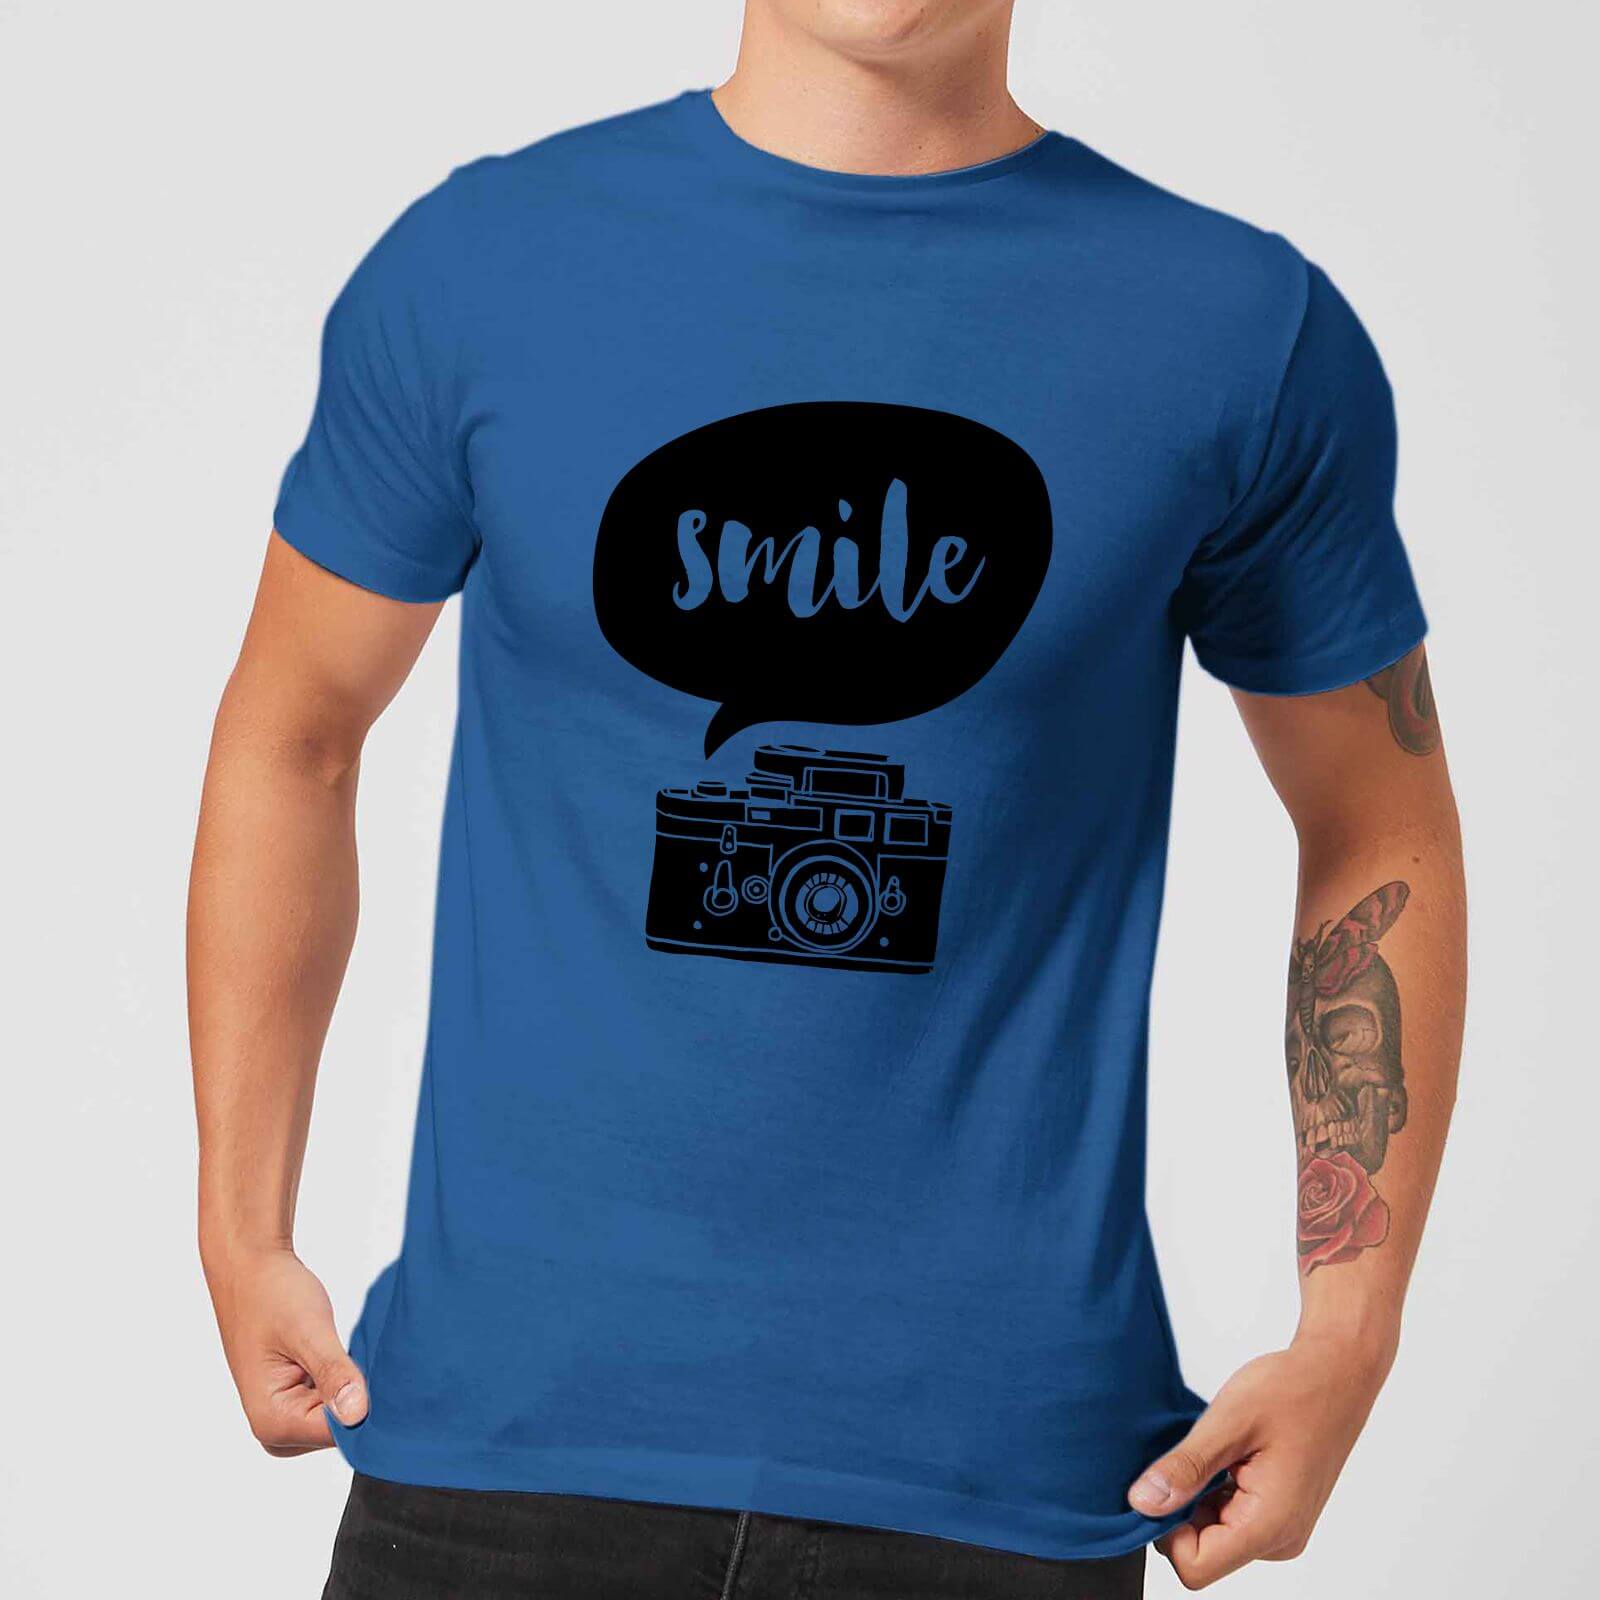 The Motivated Type Smile For The Camera Men's T-Shirt - Royal Blue - S - royal blue